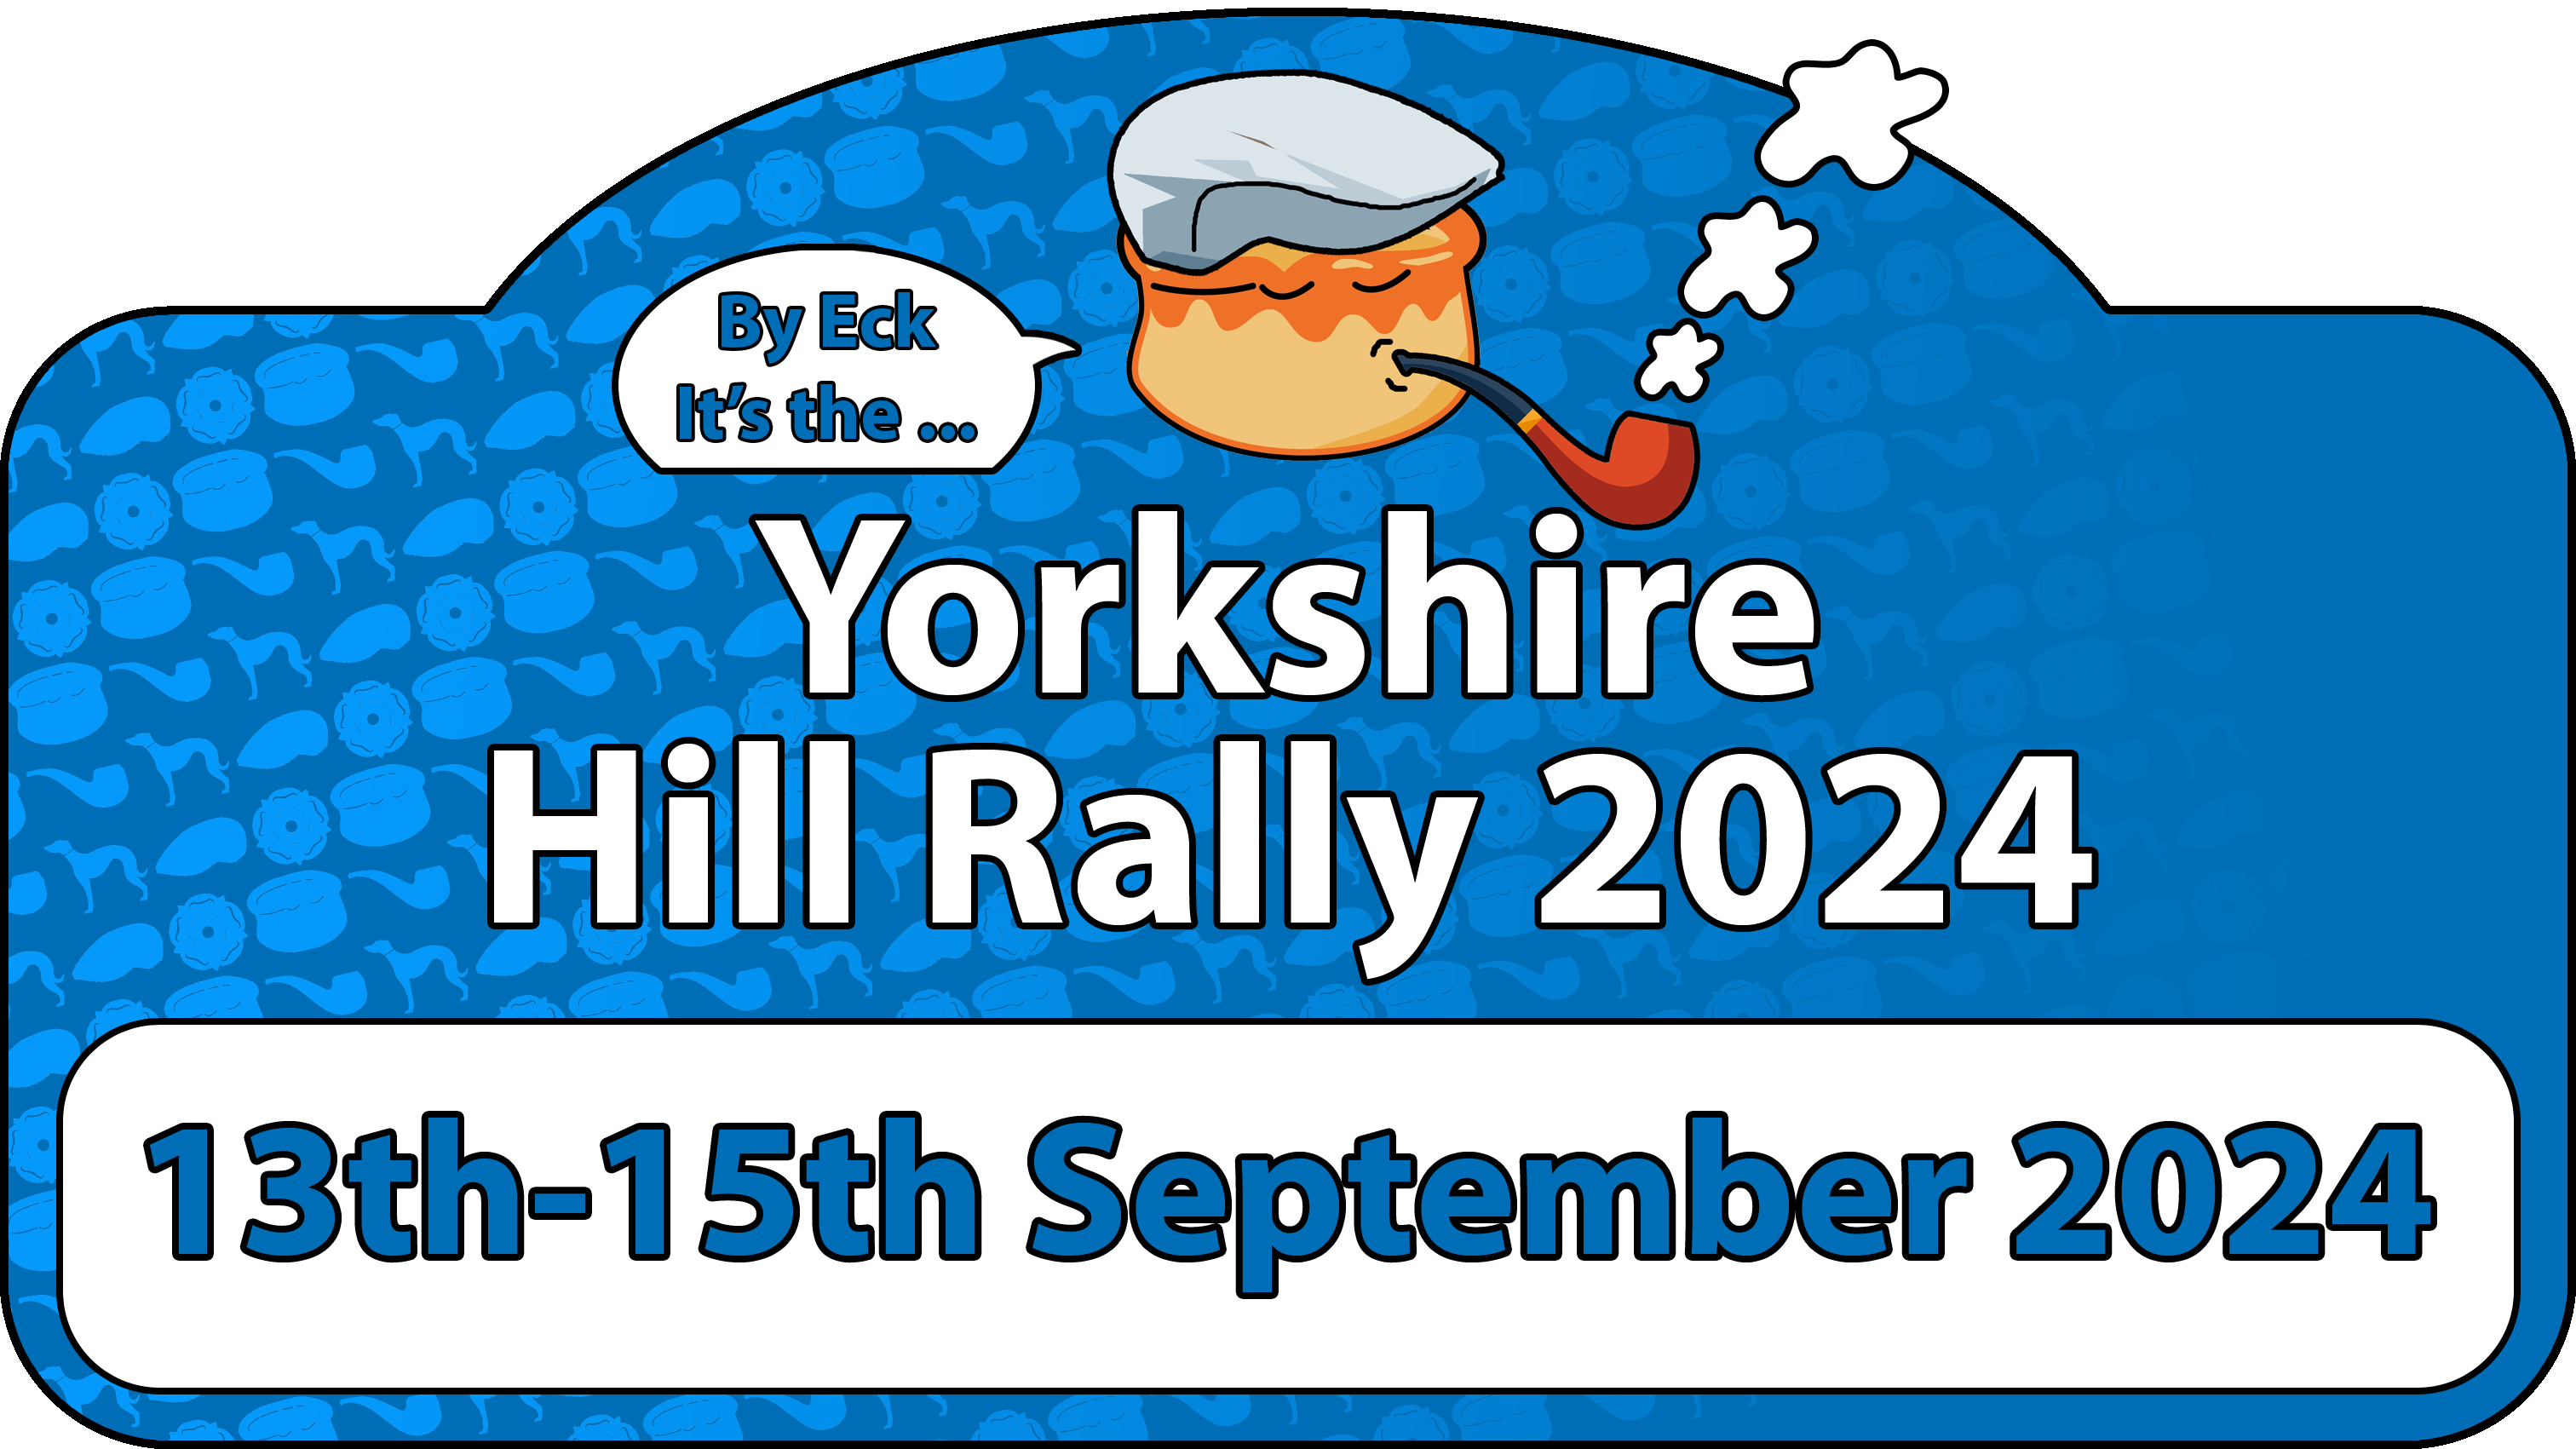 The Yorkshire Hill Rally 2024